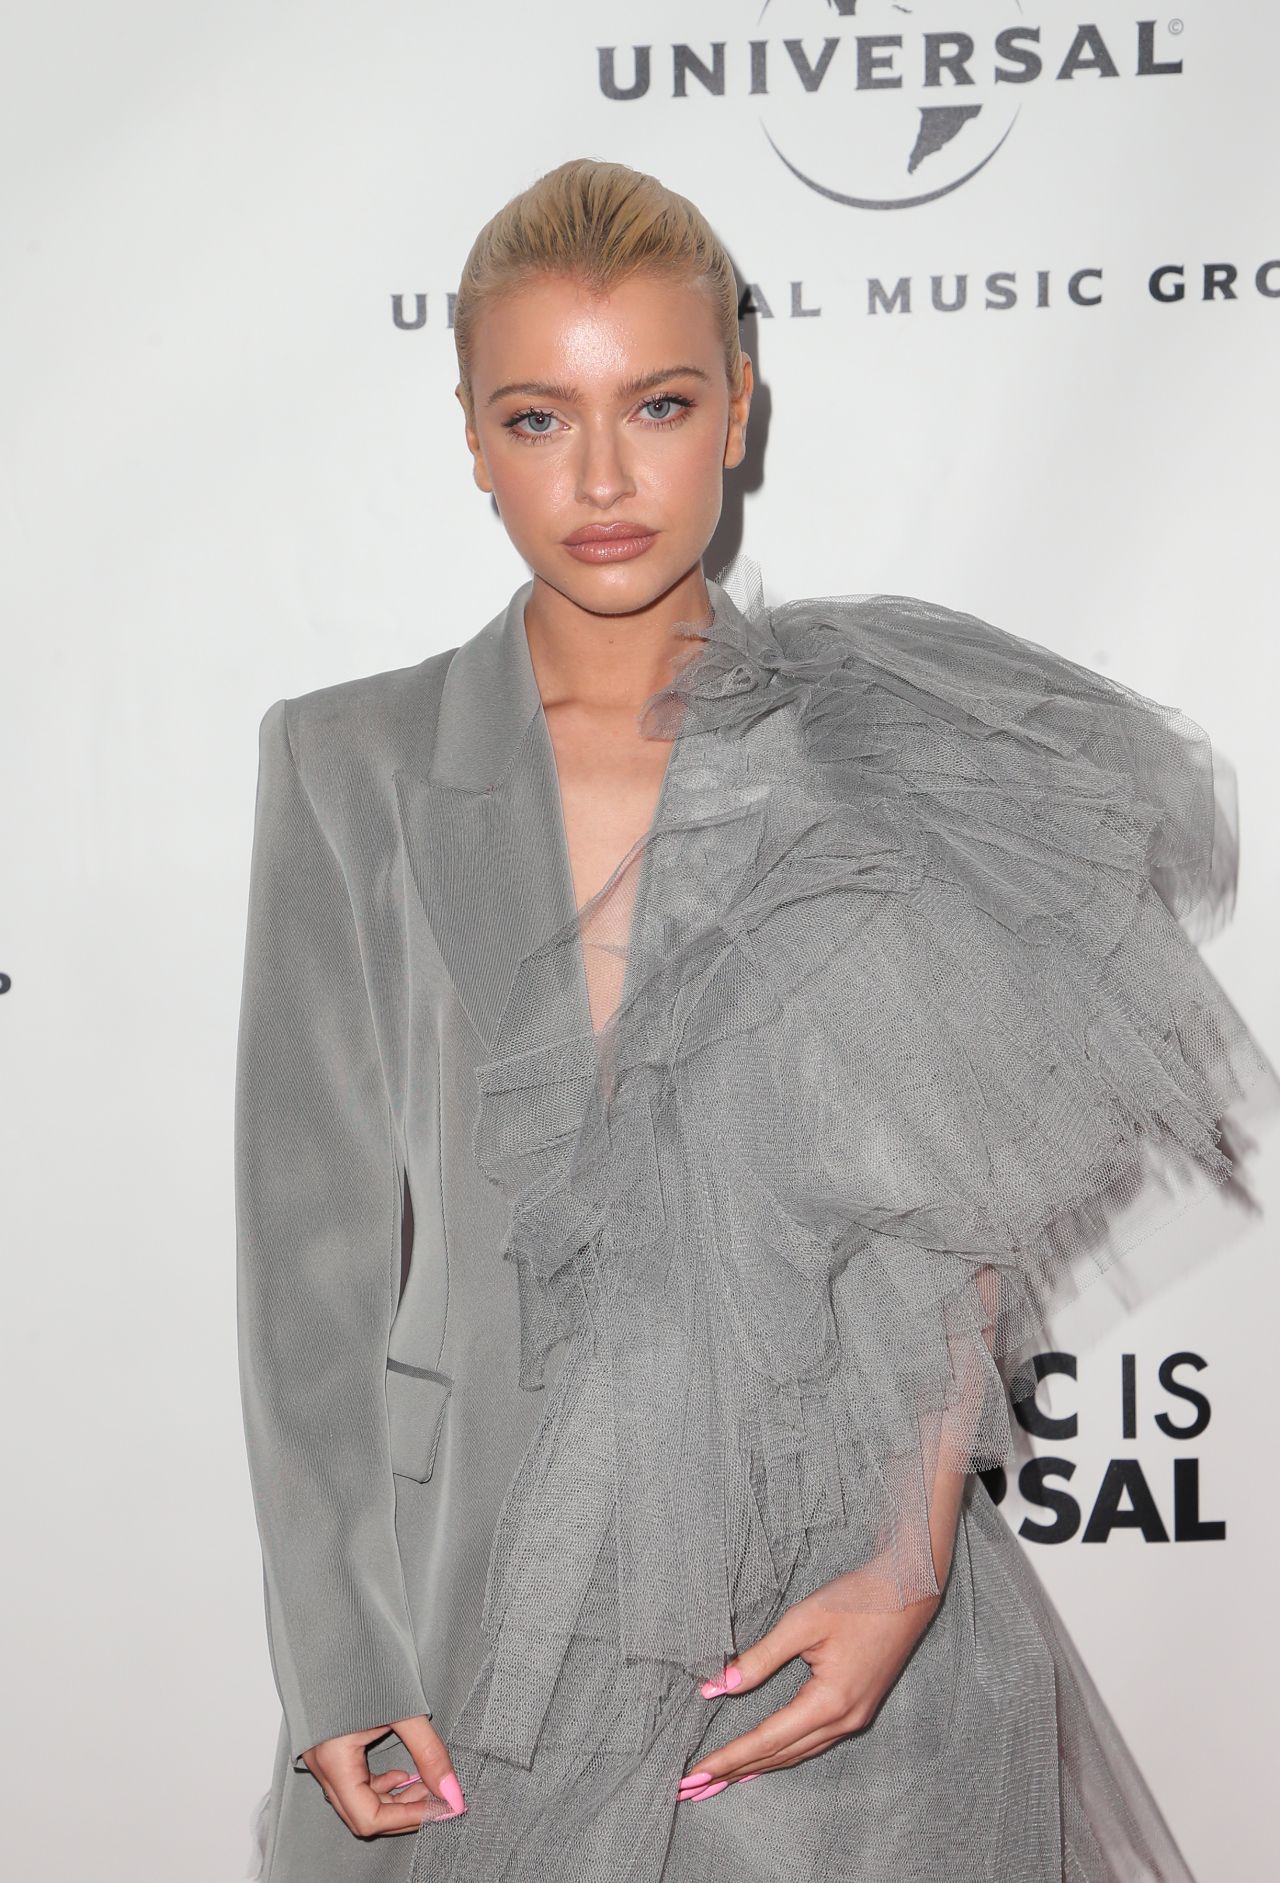 alice-chater-universal-music-group-grammy-after-party-02-10-2019-9.jpg